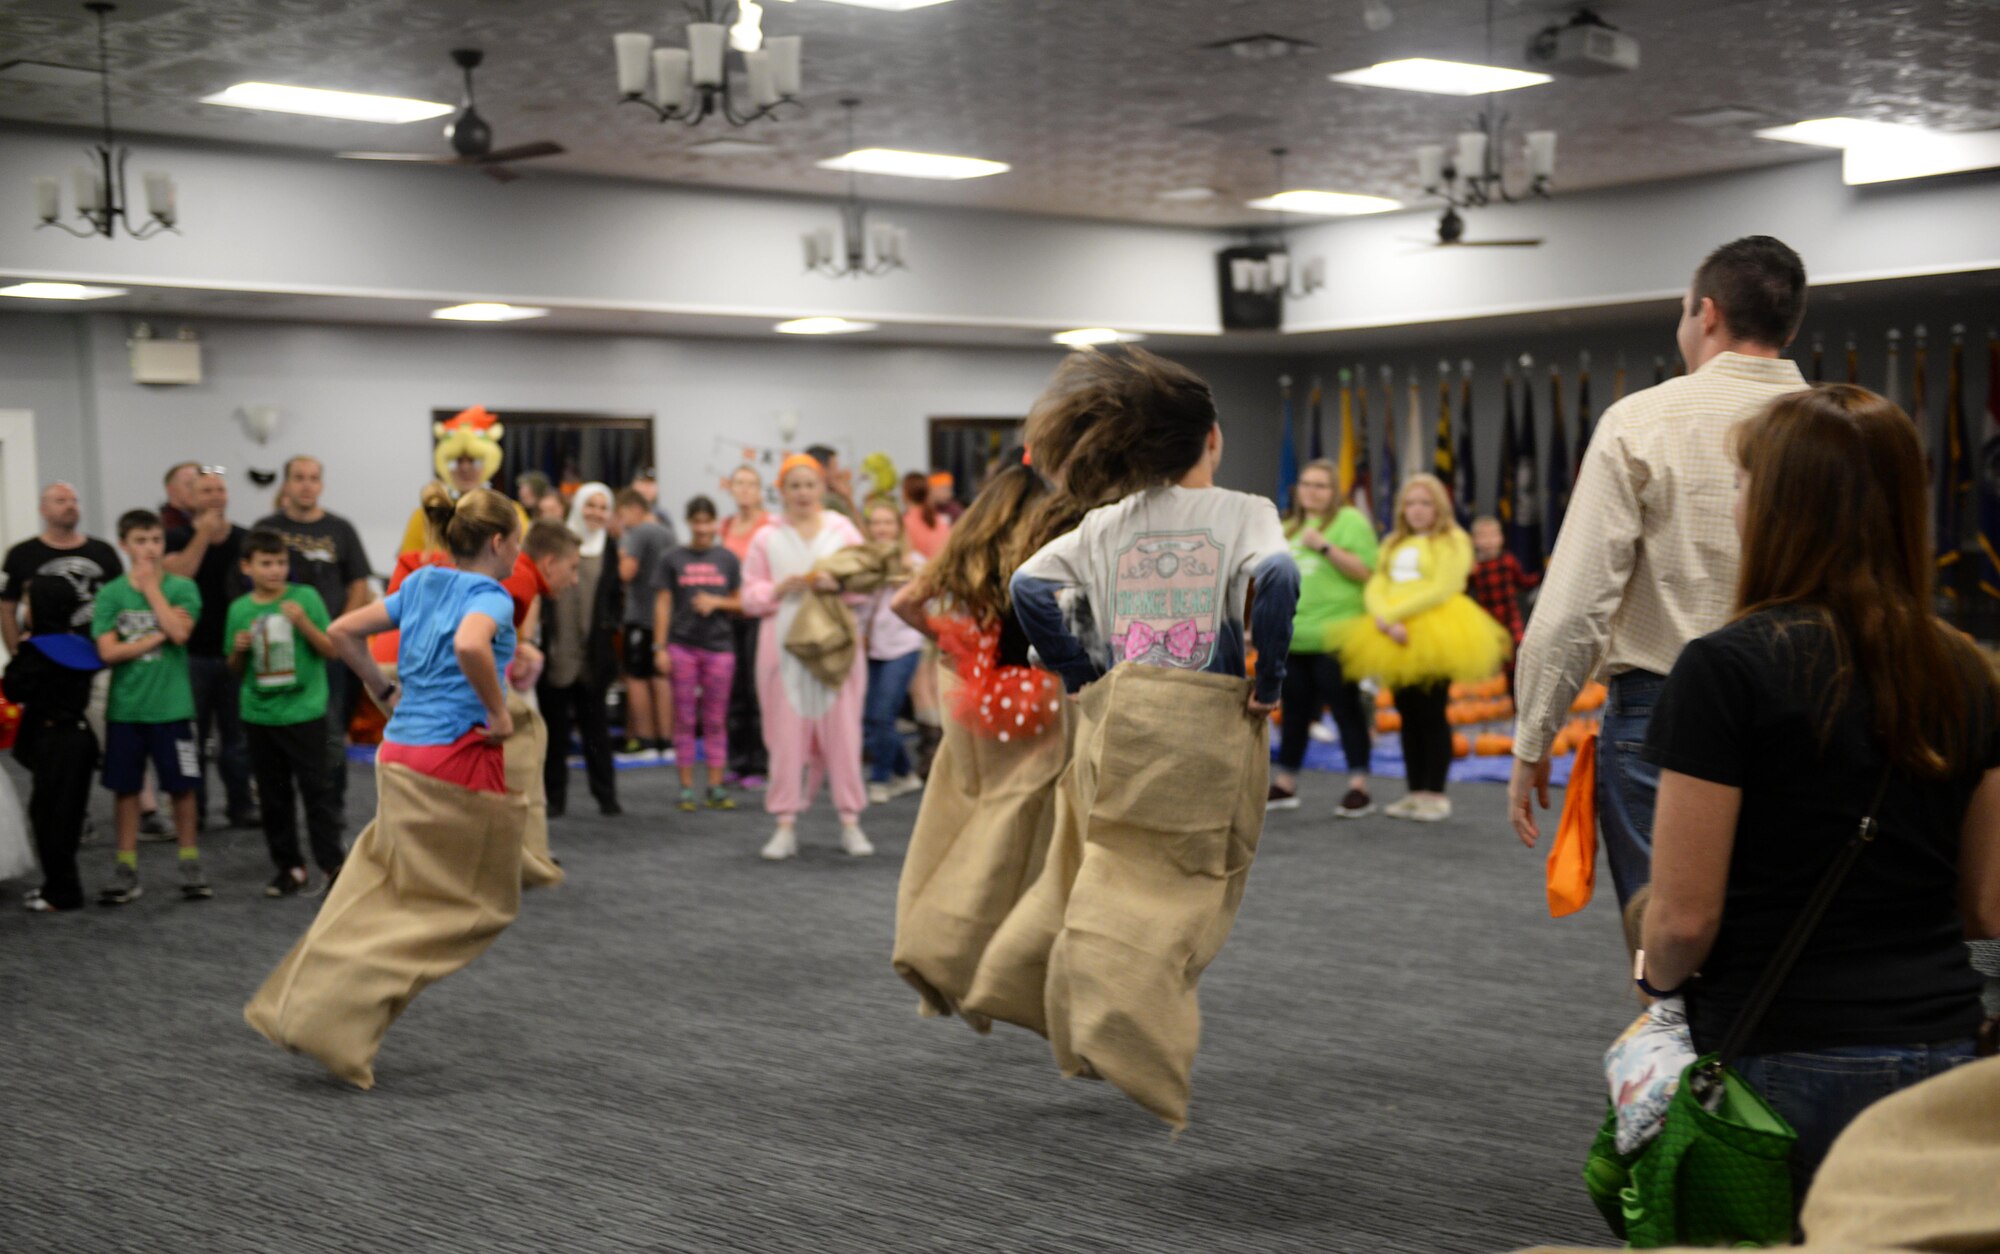 Participants race against each other in a game during Boo Fest at the Club Oct. 26, 2019, on Columbus Air Force Base, Miss. Halloween was brought to the U.S. by Irish and Scottish immigrants during the late 18th century to the early 19th century. (U.S. Air Force photo by Airman 1st Class Hannah Bean)